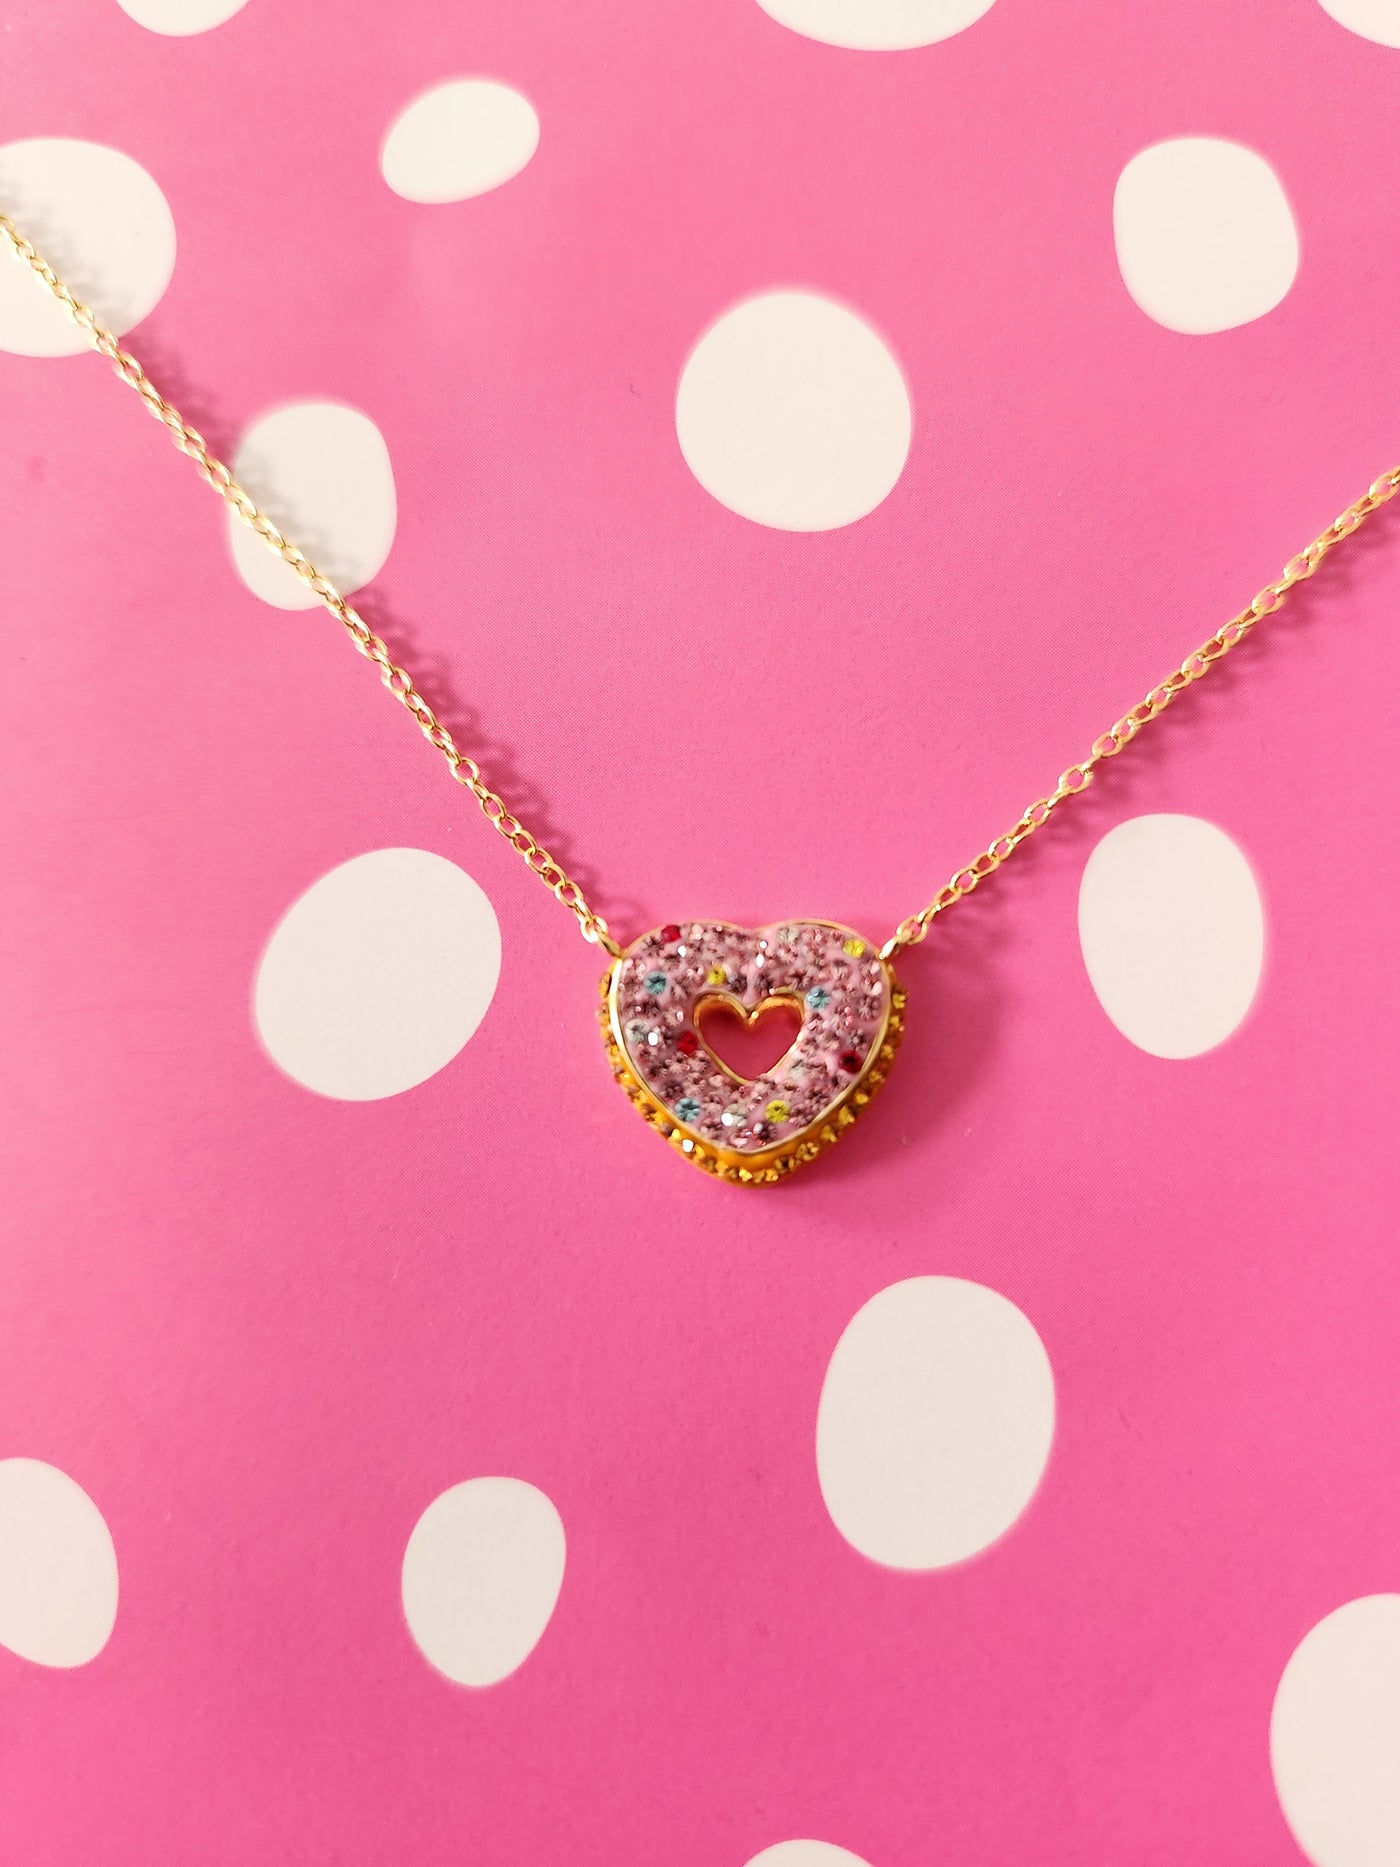 Heart Shaped Donut Crystal Gold Plated Adjustable Necklace